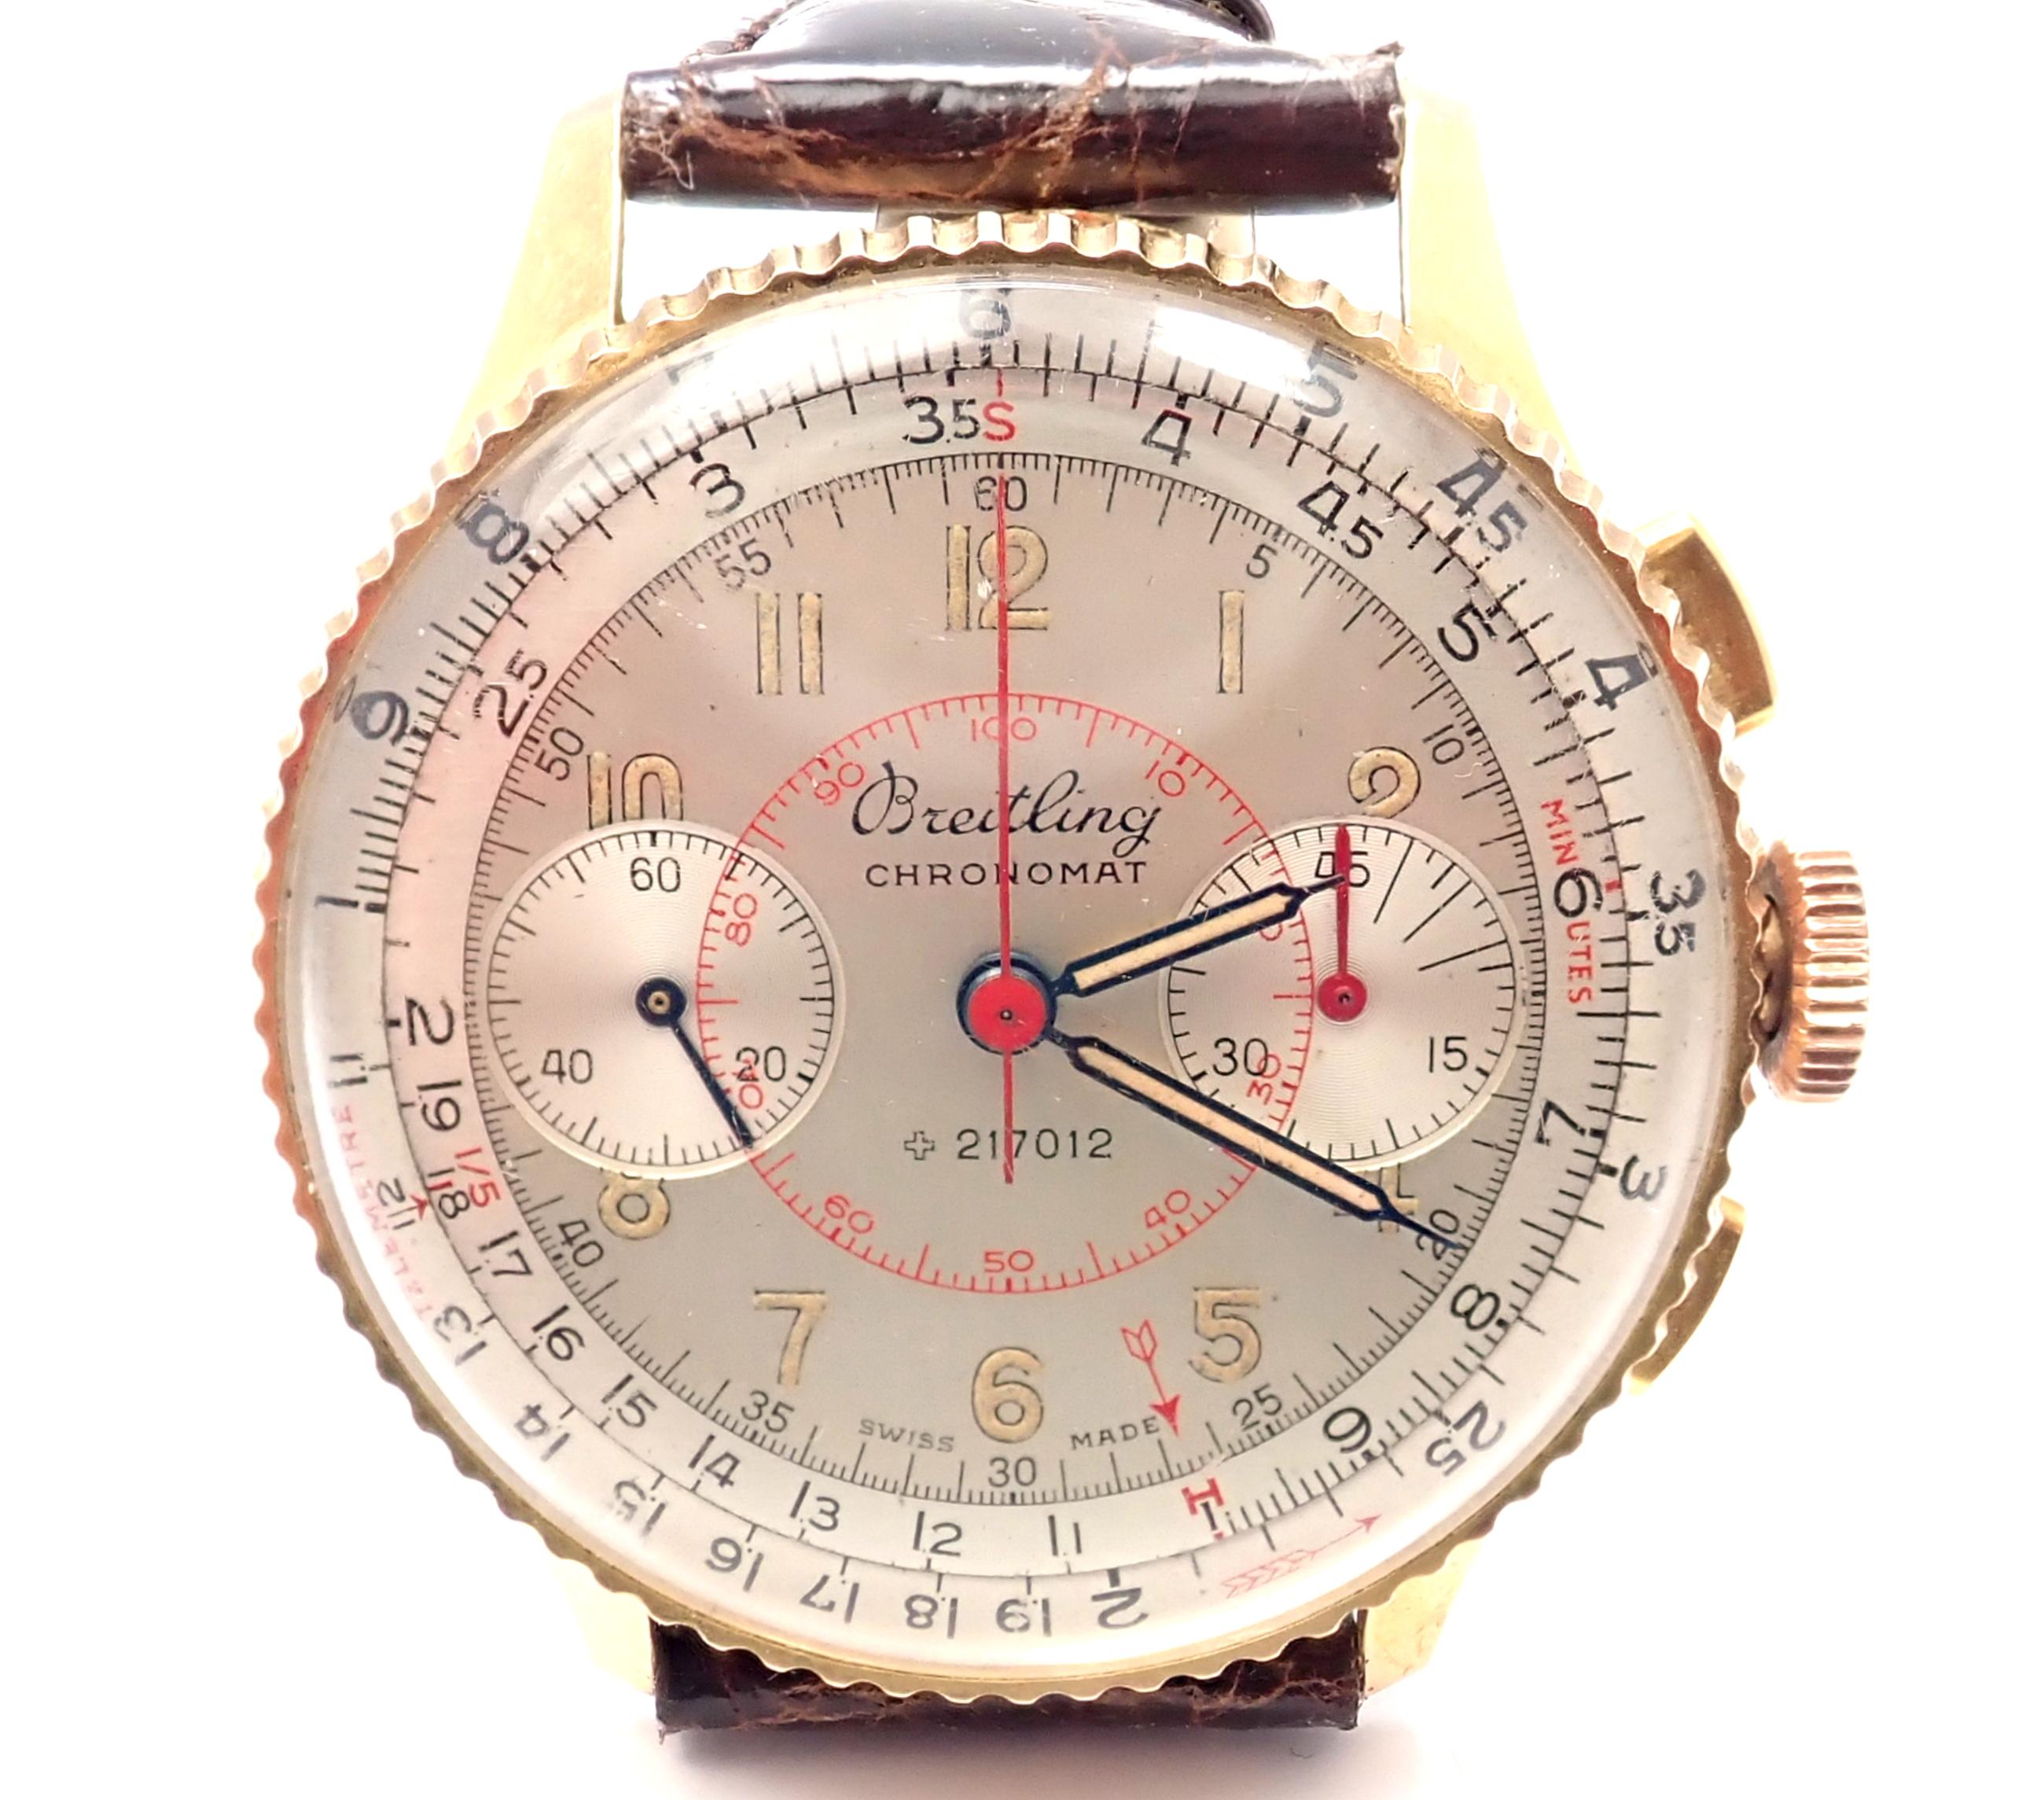 18k yellow gold Chronomat chronograph vintage wristwatch by Breitling.
Details: 
Case Size: Height w/Lugs: 43mm
Width w/o Crown: 36.5mm 
Thickness w/ Crystal: 12mm
Bracelet/Strap: New Aftermarket Genuine Crocodile
Movement: Manual Wind. Movement is